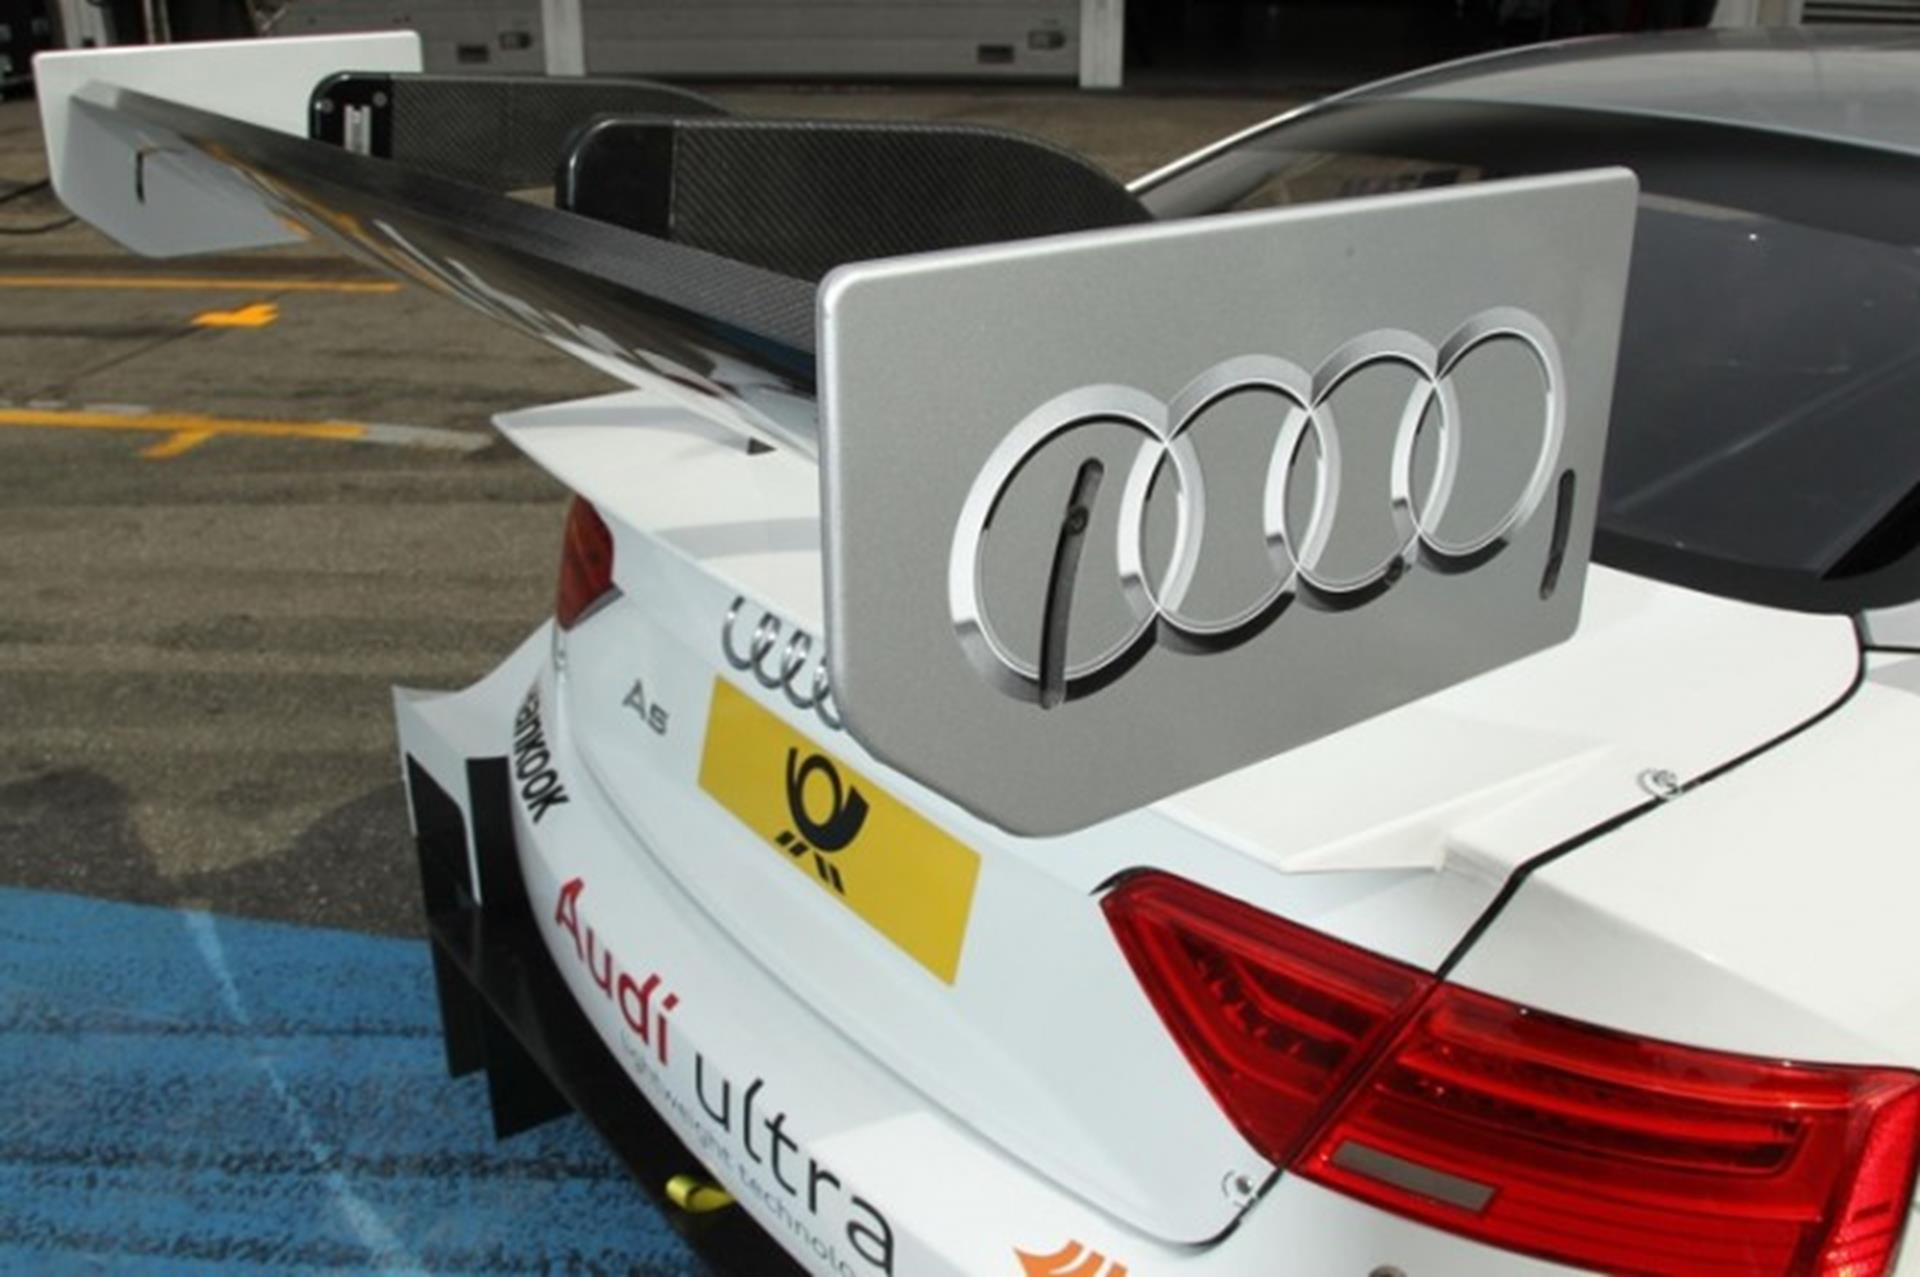 THE AUDI A5 DTM: A HIGH-TECH JIGSAW PUZZLE CONSISTING OF OVER 4,000 PARTS